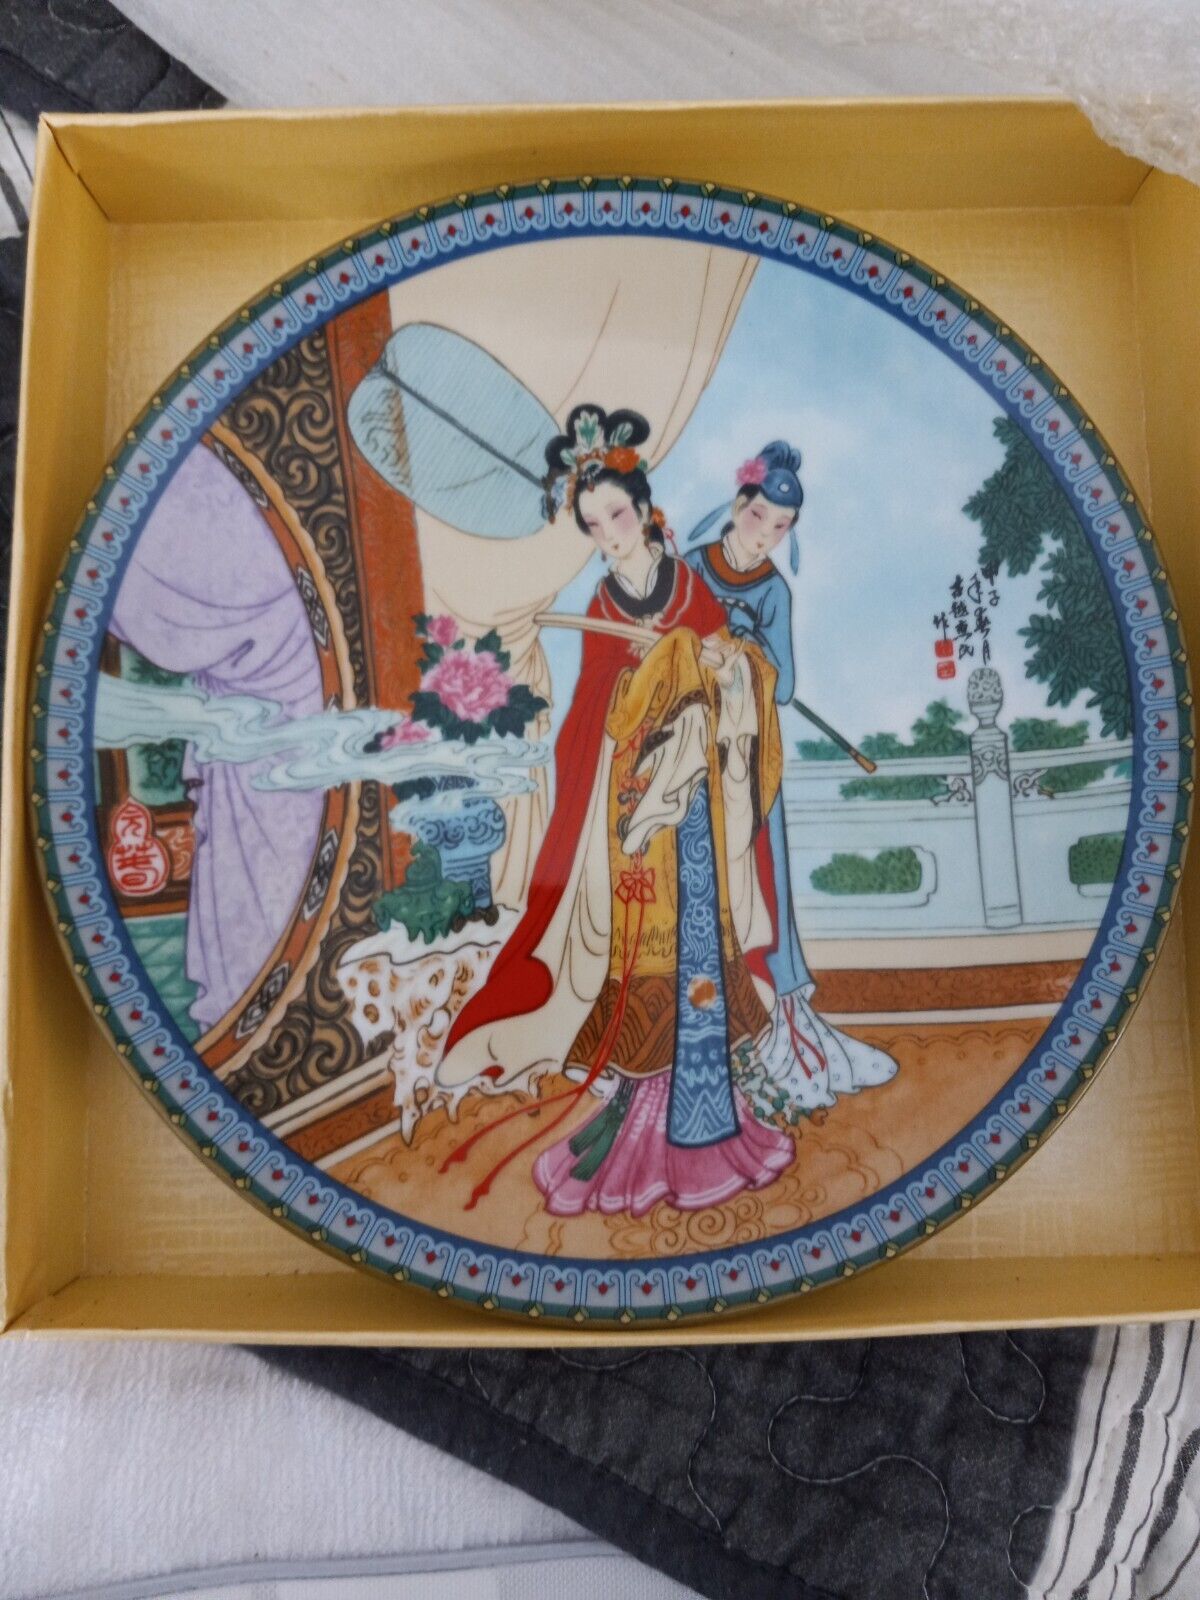 NIB Exquisite Collectable Asian Plate Of An Etheral Being Perfectly Packaged 